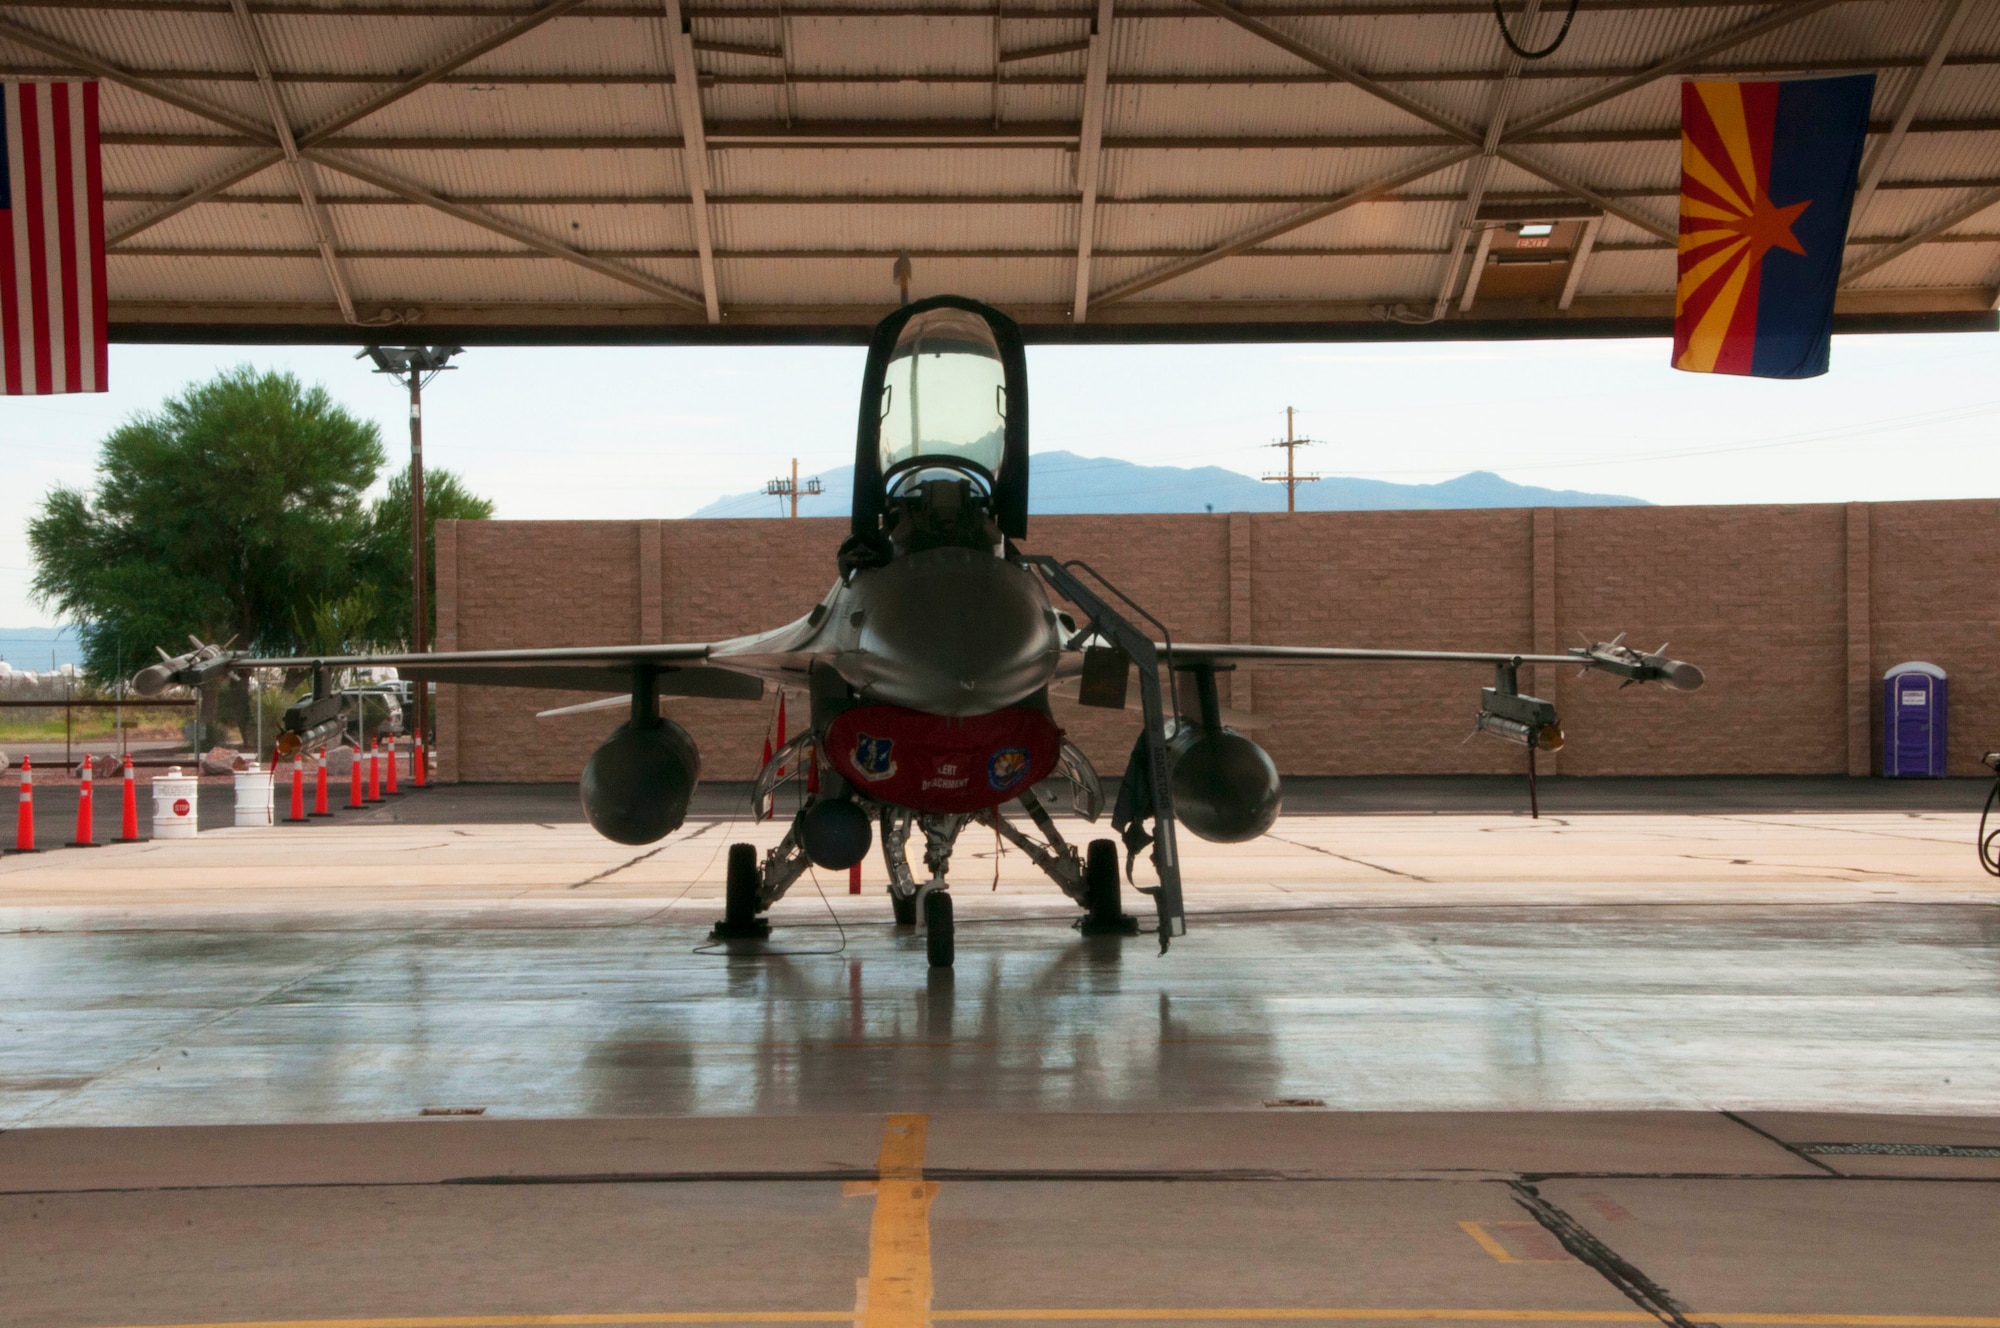 An F-16 from the Aerospace Control Alert Detachment from the 162nd Wing sits at the ready in a hangar at Davis-Monthan Air Force Base in Tucson, Arizona, Sept. 12, 2015. The detachment maintains the ability to quickly scramble in response to airborne threats in the Southwest United States, as well as proactively defend large gatherings and high profile events. (Air National Guard photo by Senior Airman David English)